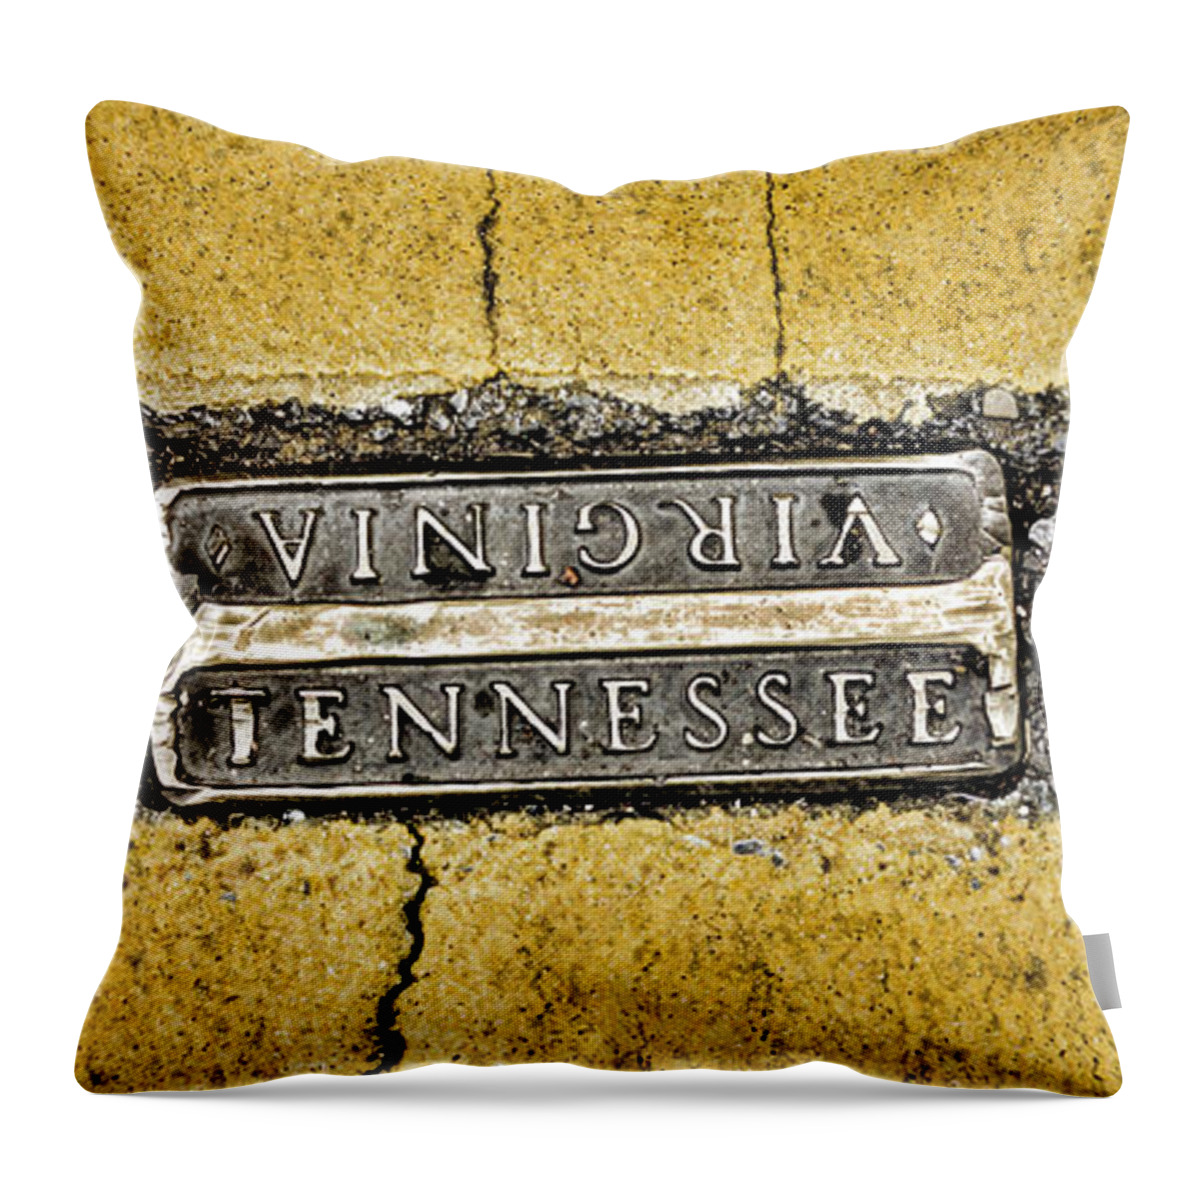 Bristol Throw Pillow featuring the photograph Bristol Tennessee Street Pano by Heather Applegate